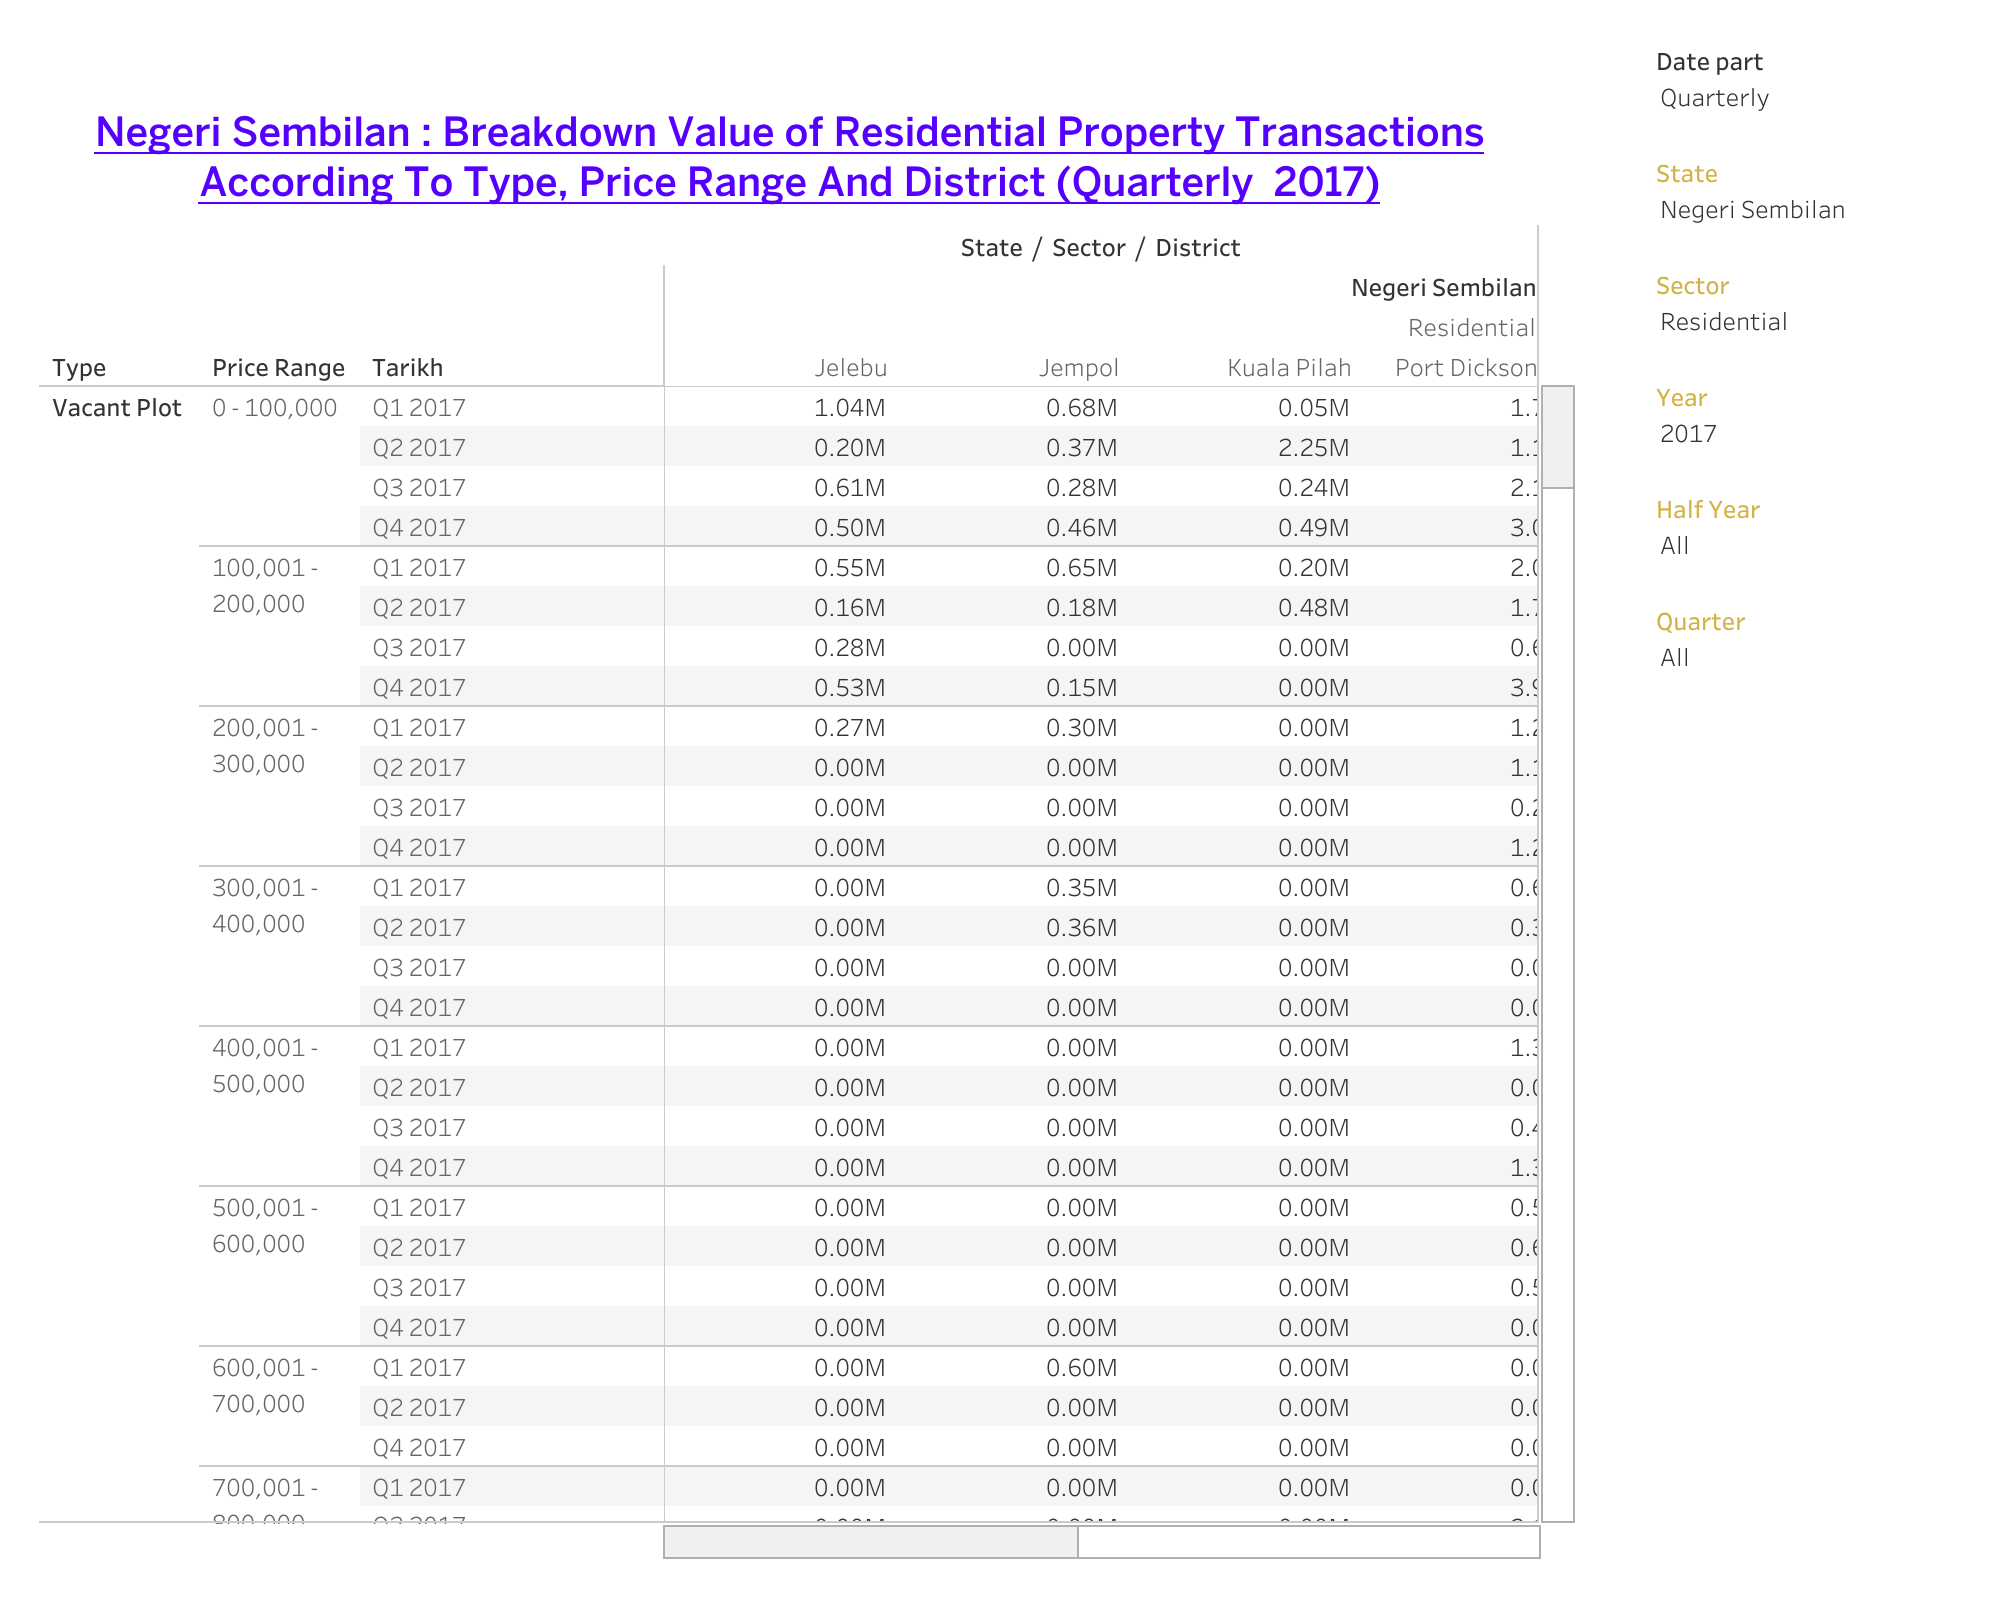 STATE : Breakdown Value of Property Transactions According To Type, Price Range And District